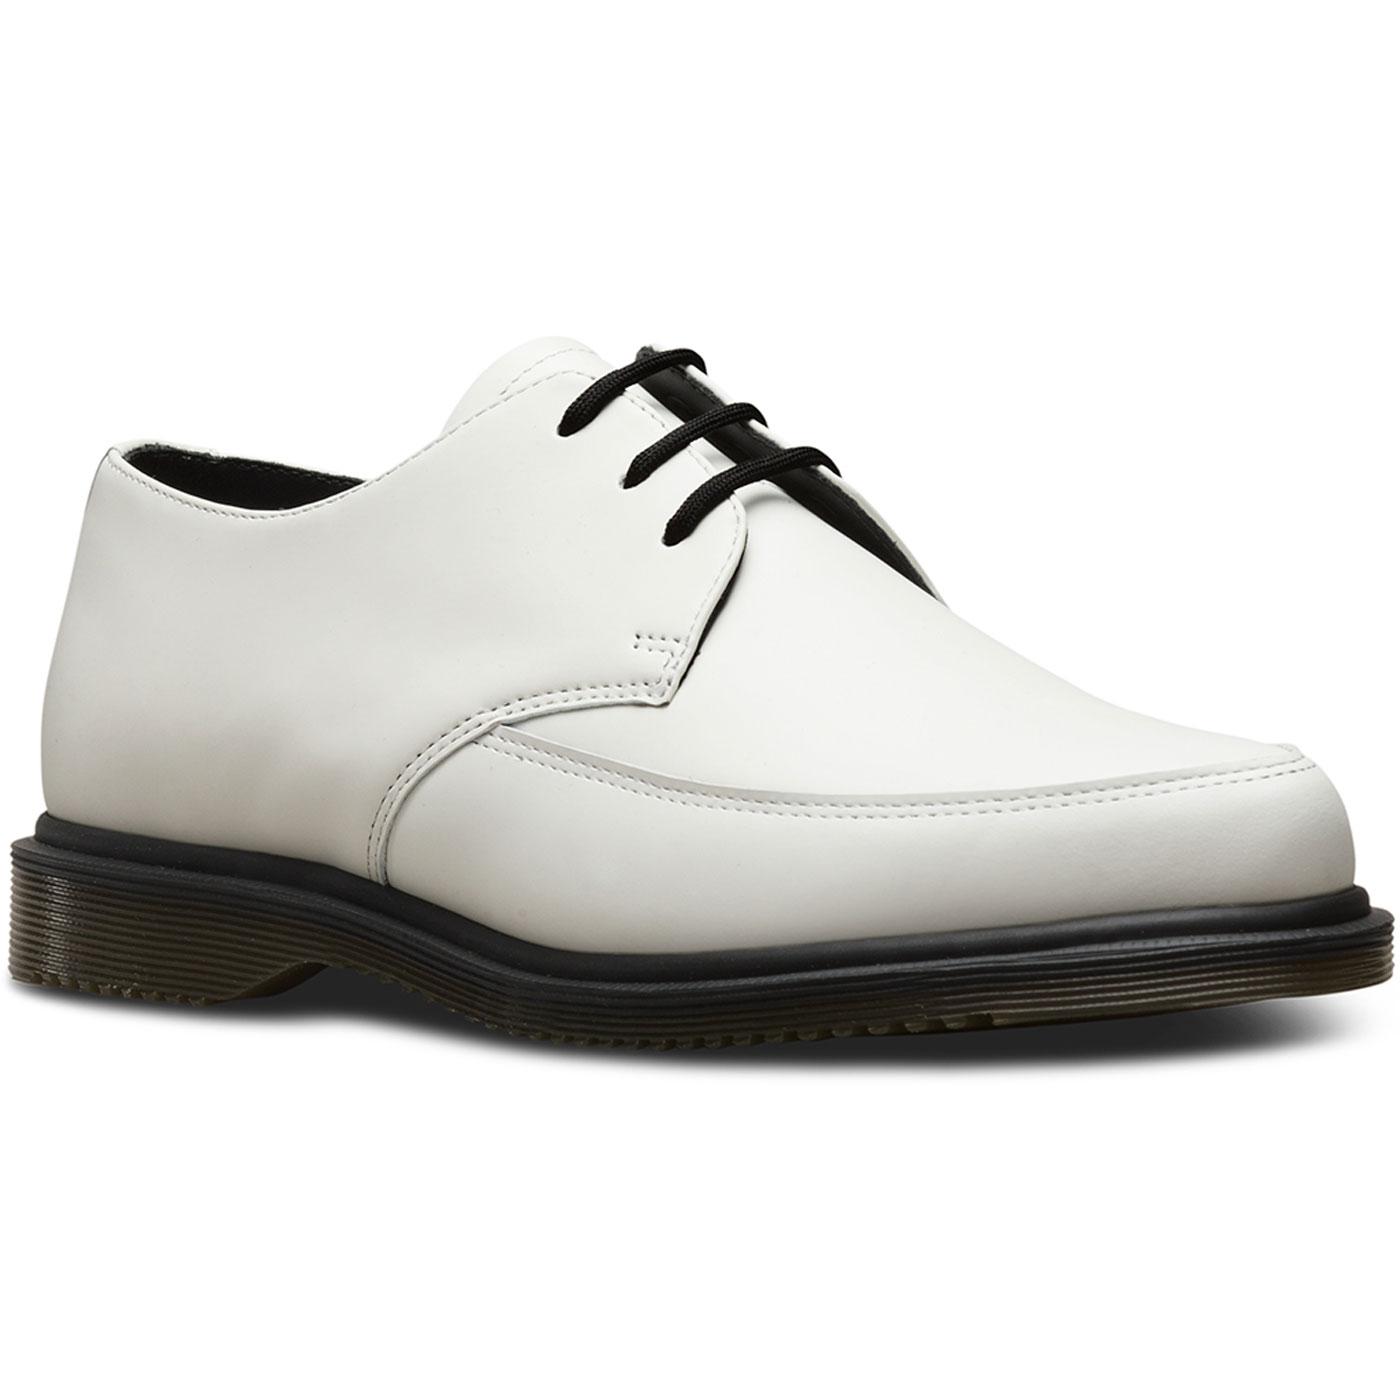 Dr Martens Mens Willis 1950s Smooth Creepers White